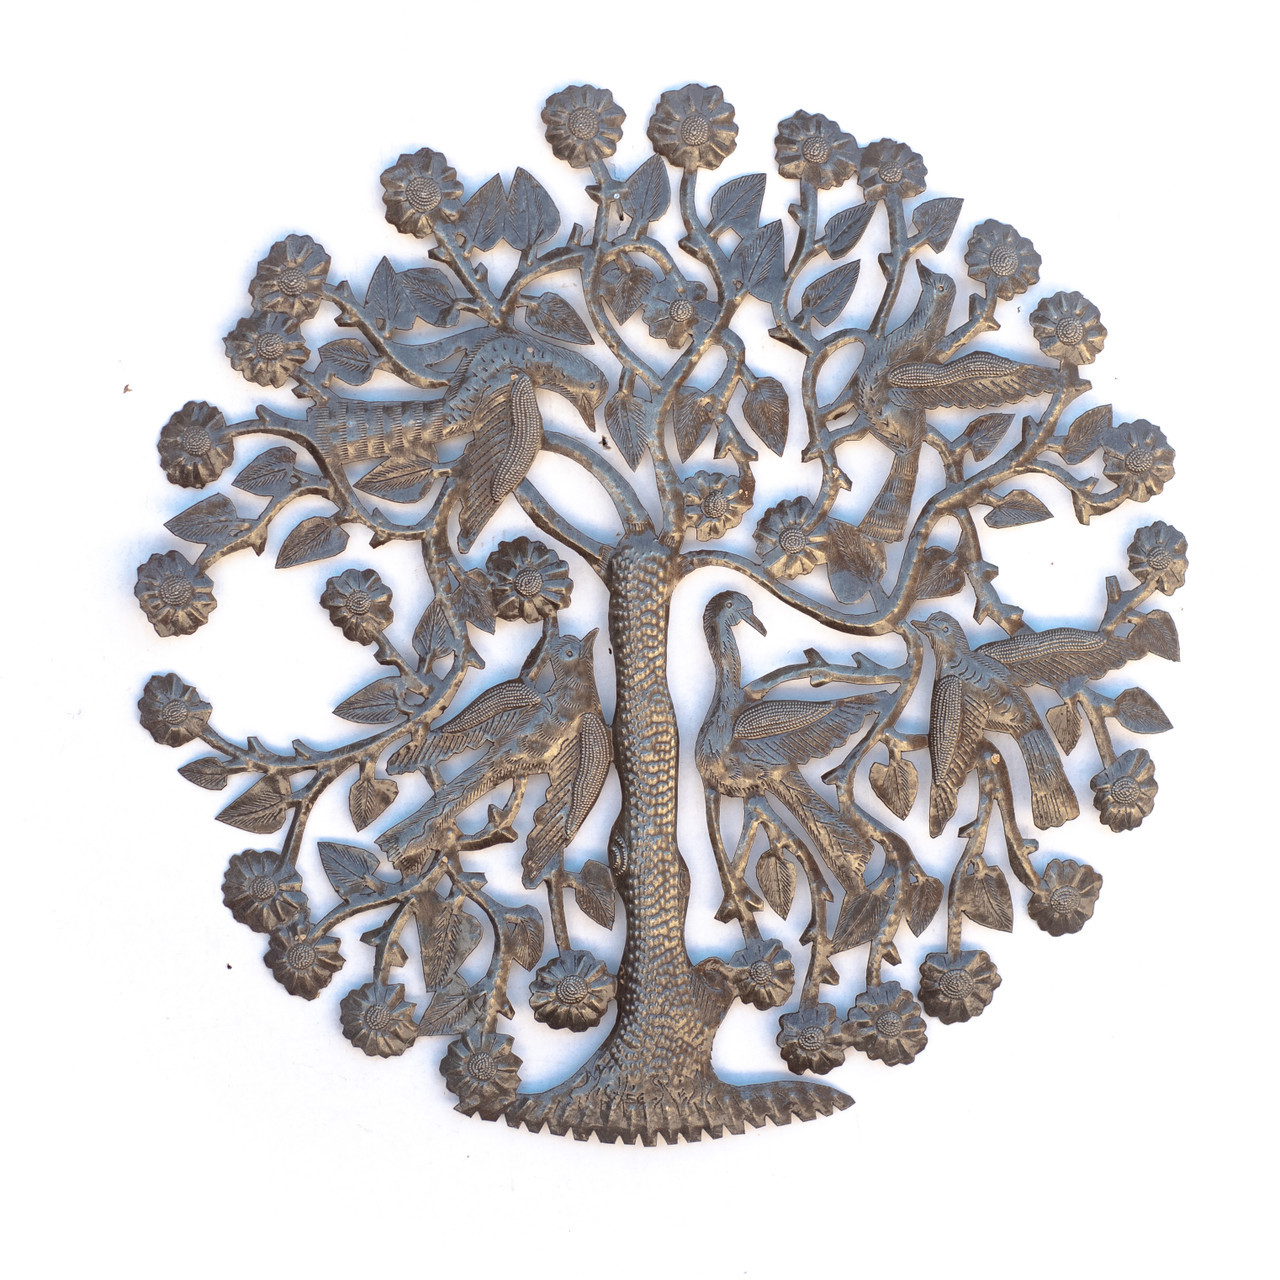 Tree of Life, Flowers, Floral Tree, Flowery, One-of-a-Kind, Limited Edition, Sustainable, Eco-Friendly, Limited Edition, Recycle, Recyclable, Fair Trade, Steel, Metal, Oil Barrels